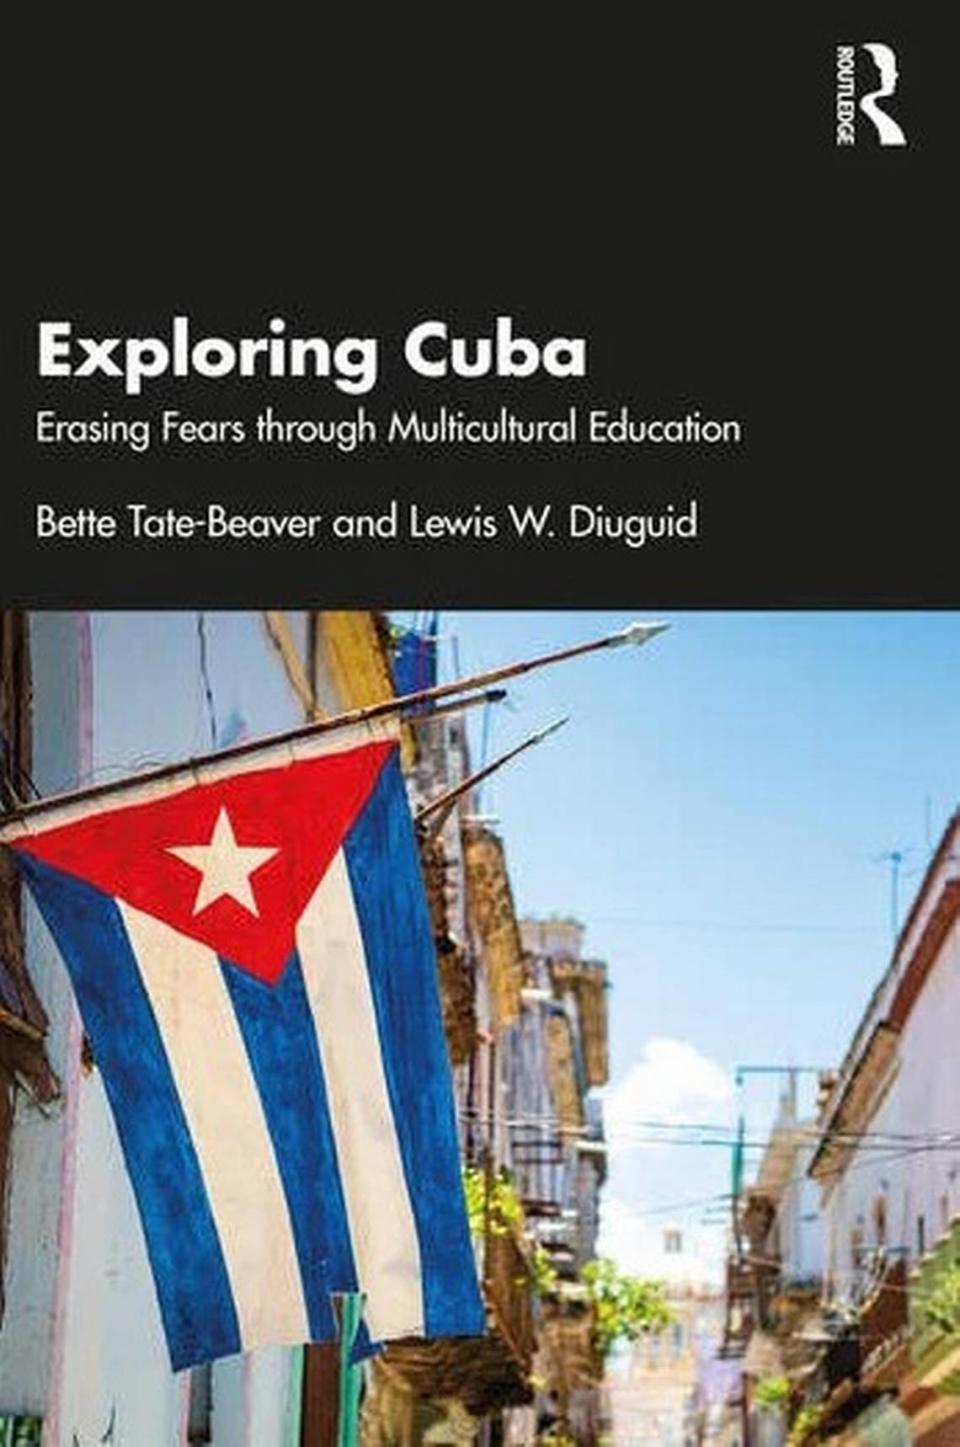 “Exploring Cuba: Erasing Fears Through Multicultural Education” by Bette Tate-Beaver and Lewis W. Diuguid